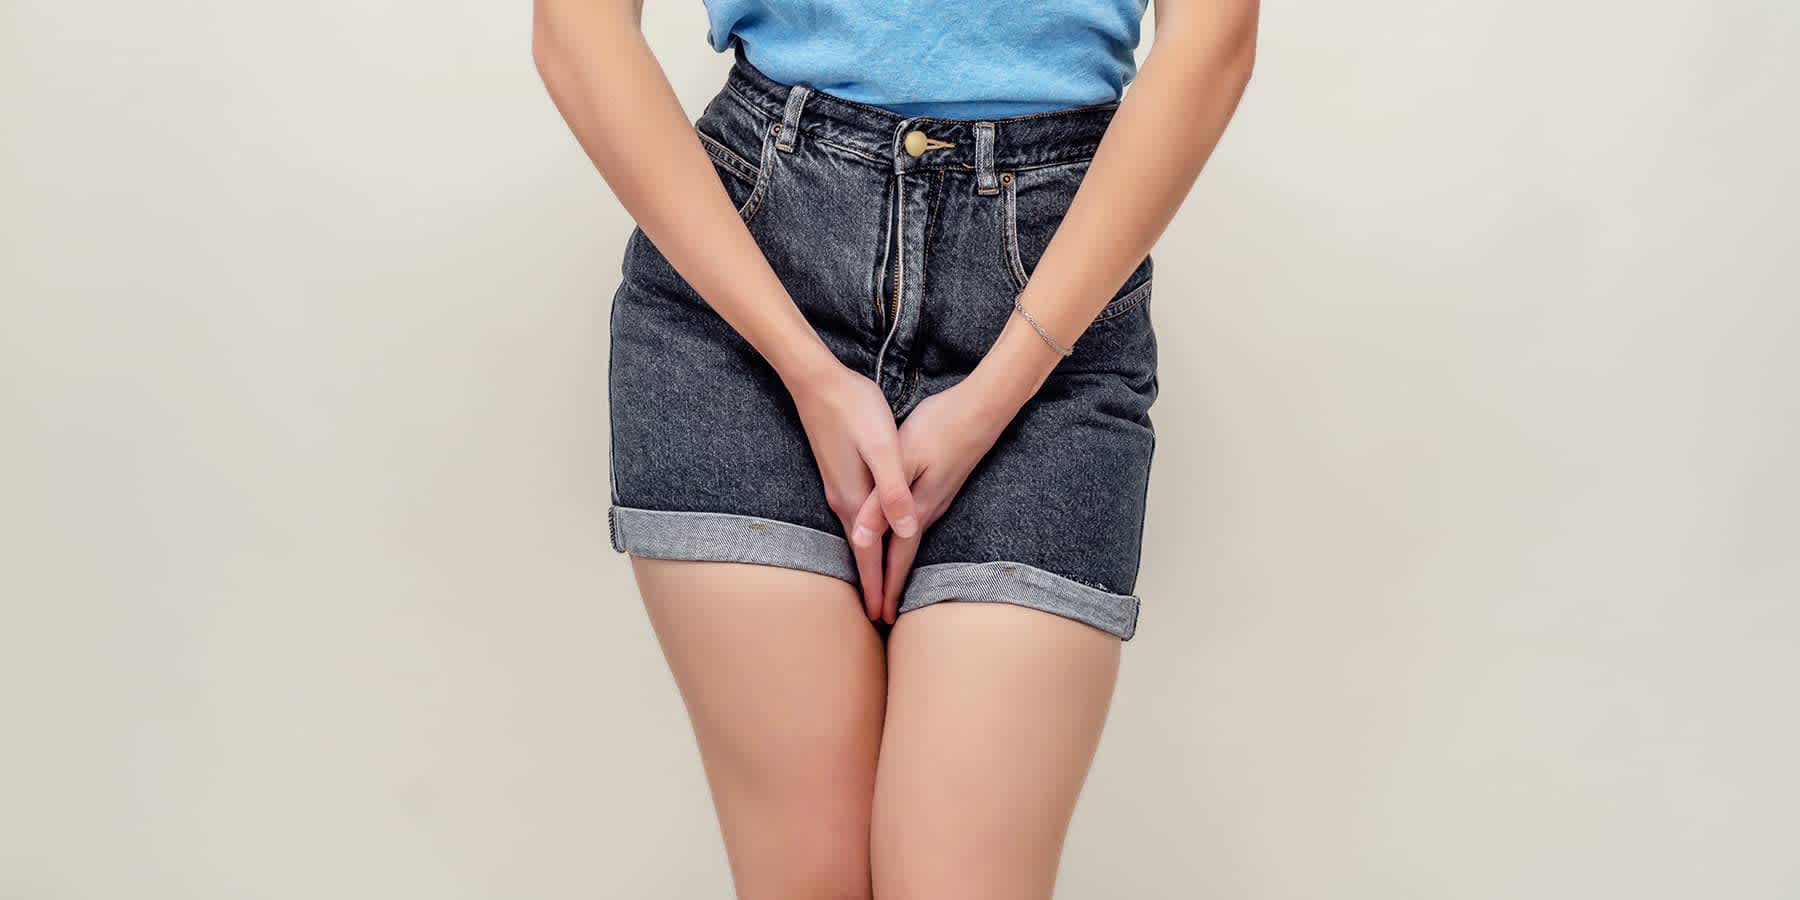 Young woman with hands over groin wondering what vaginal itching is